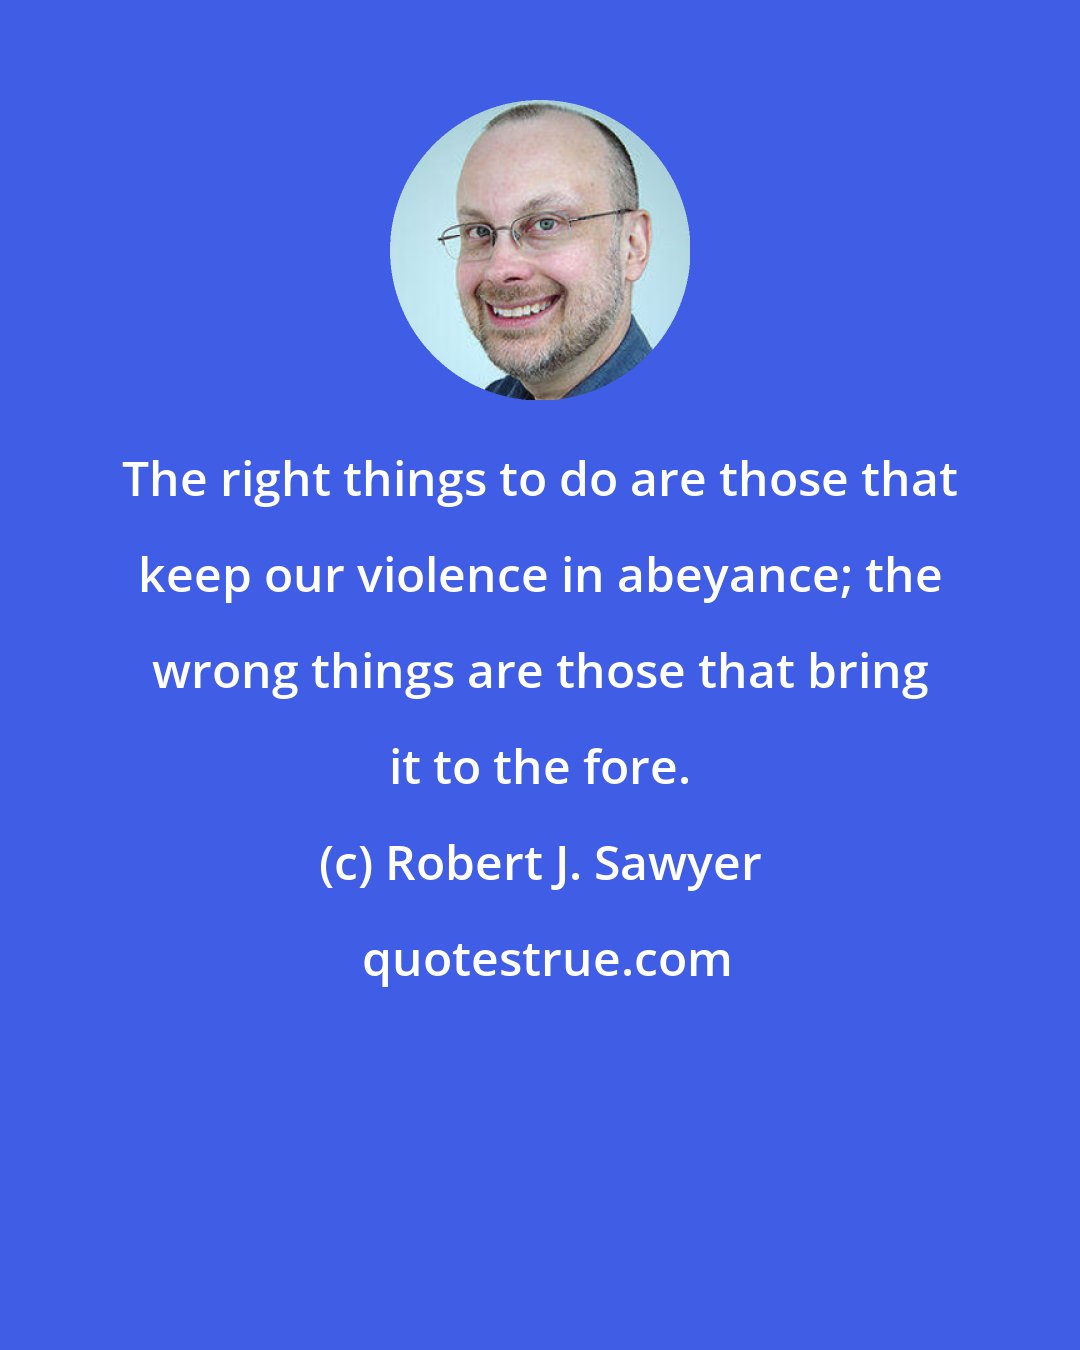 Robert J. Sawyer: The right things to do are those that keep our violence in abeyance; the wrong things are those that bring it to the fore.